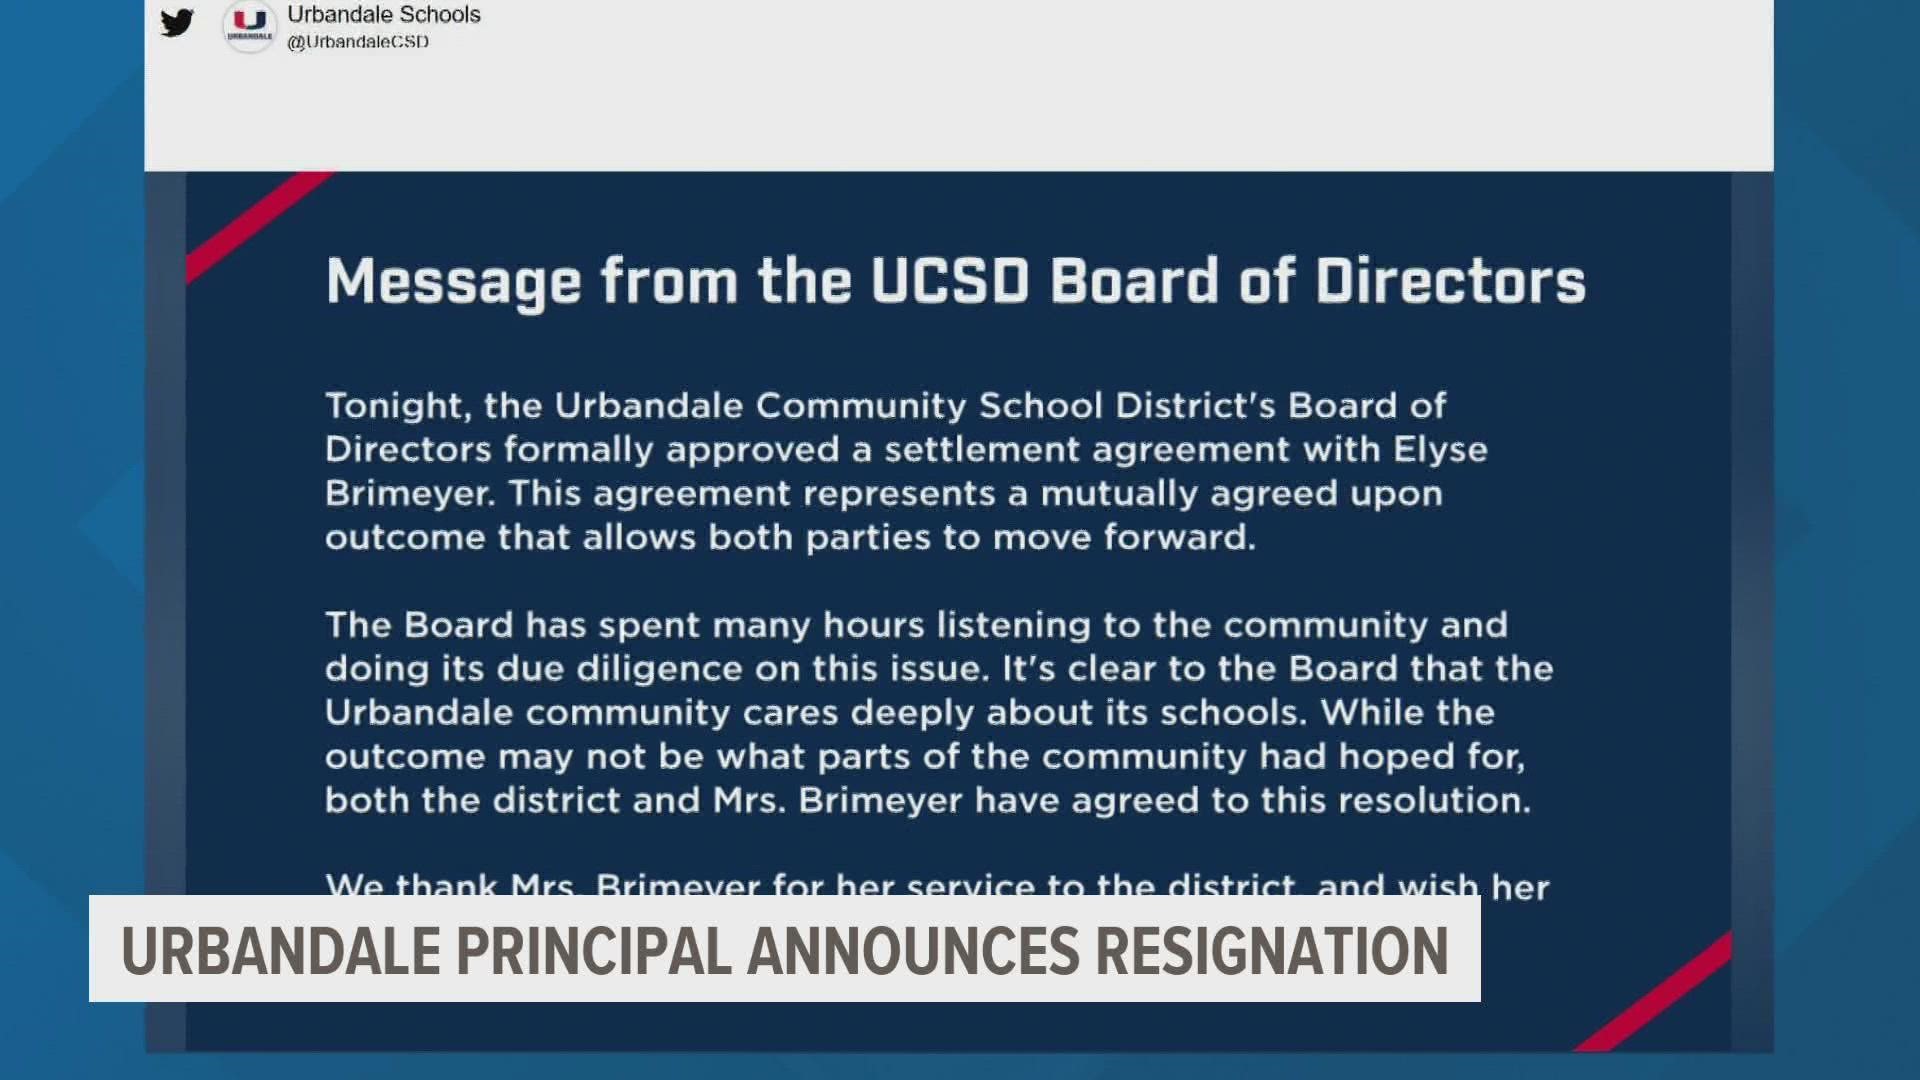 The Urbandale School District has made a decision about the future of Elyse Brimeyer, who was put on administrative leave in January.